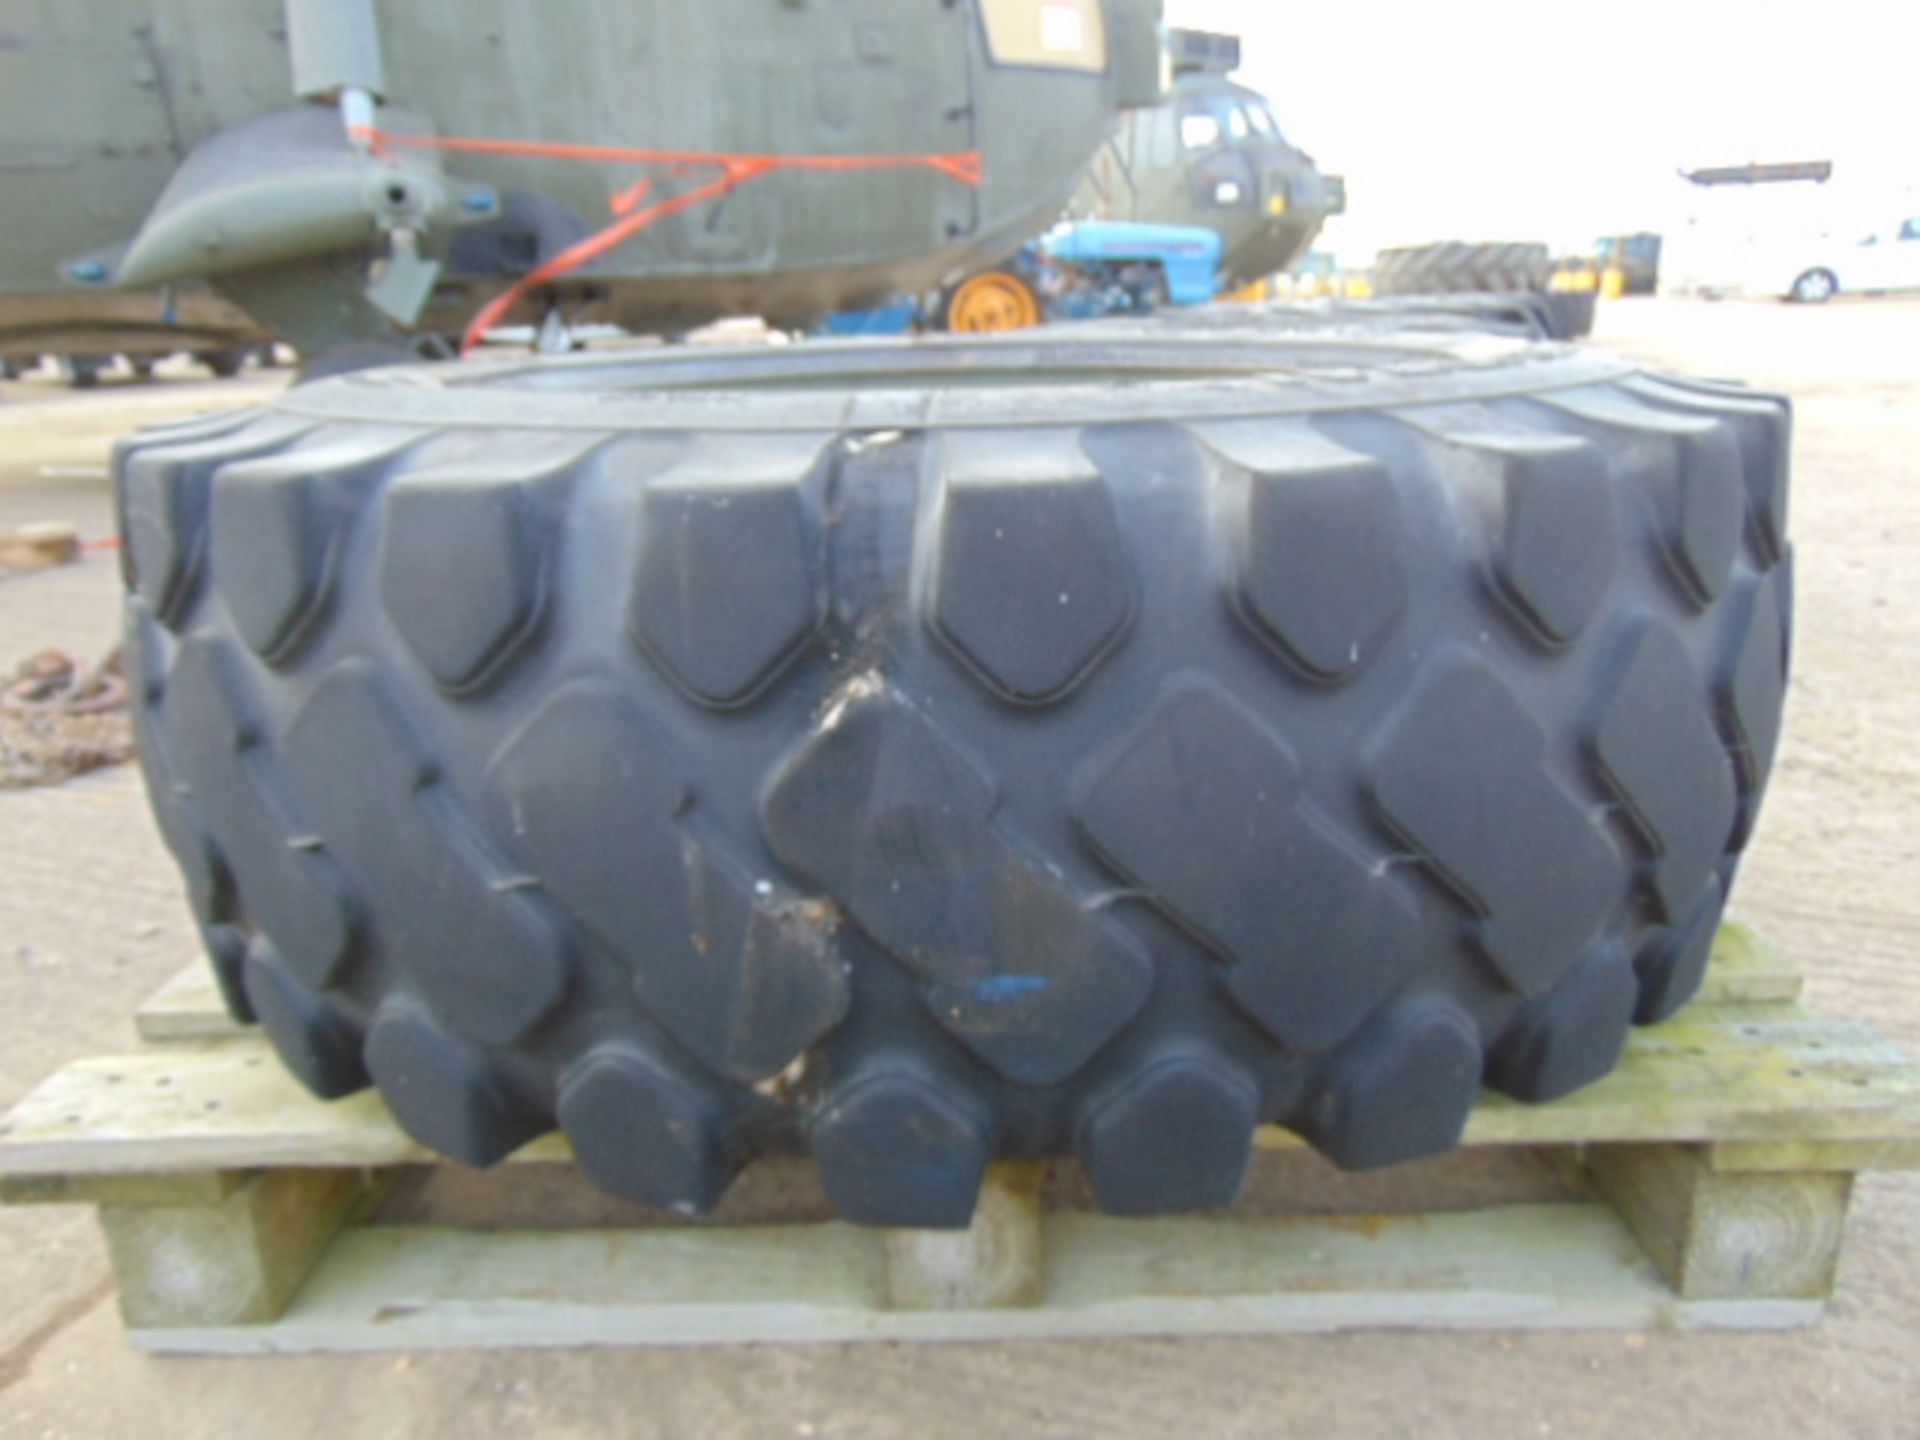 1 x Solideal Load Master 15.5-23 L3 Tyre C/W 5 Stud Rim - Image 2 of 6